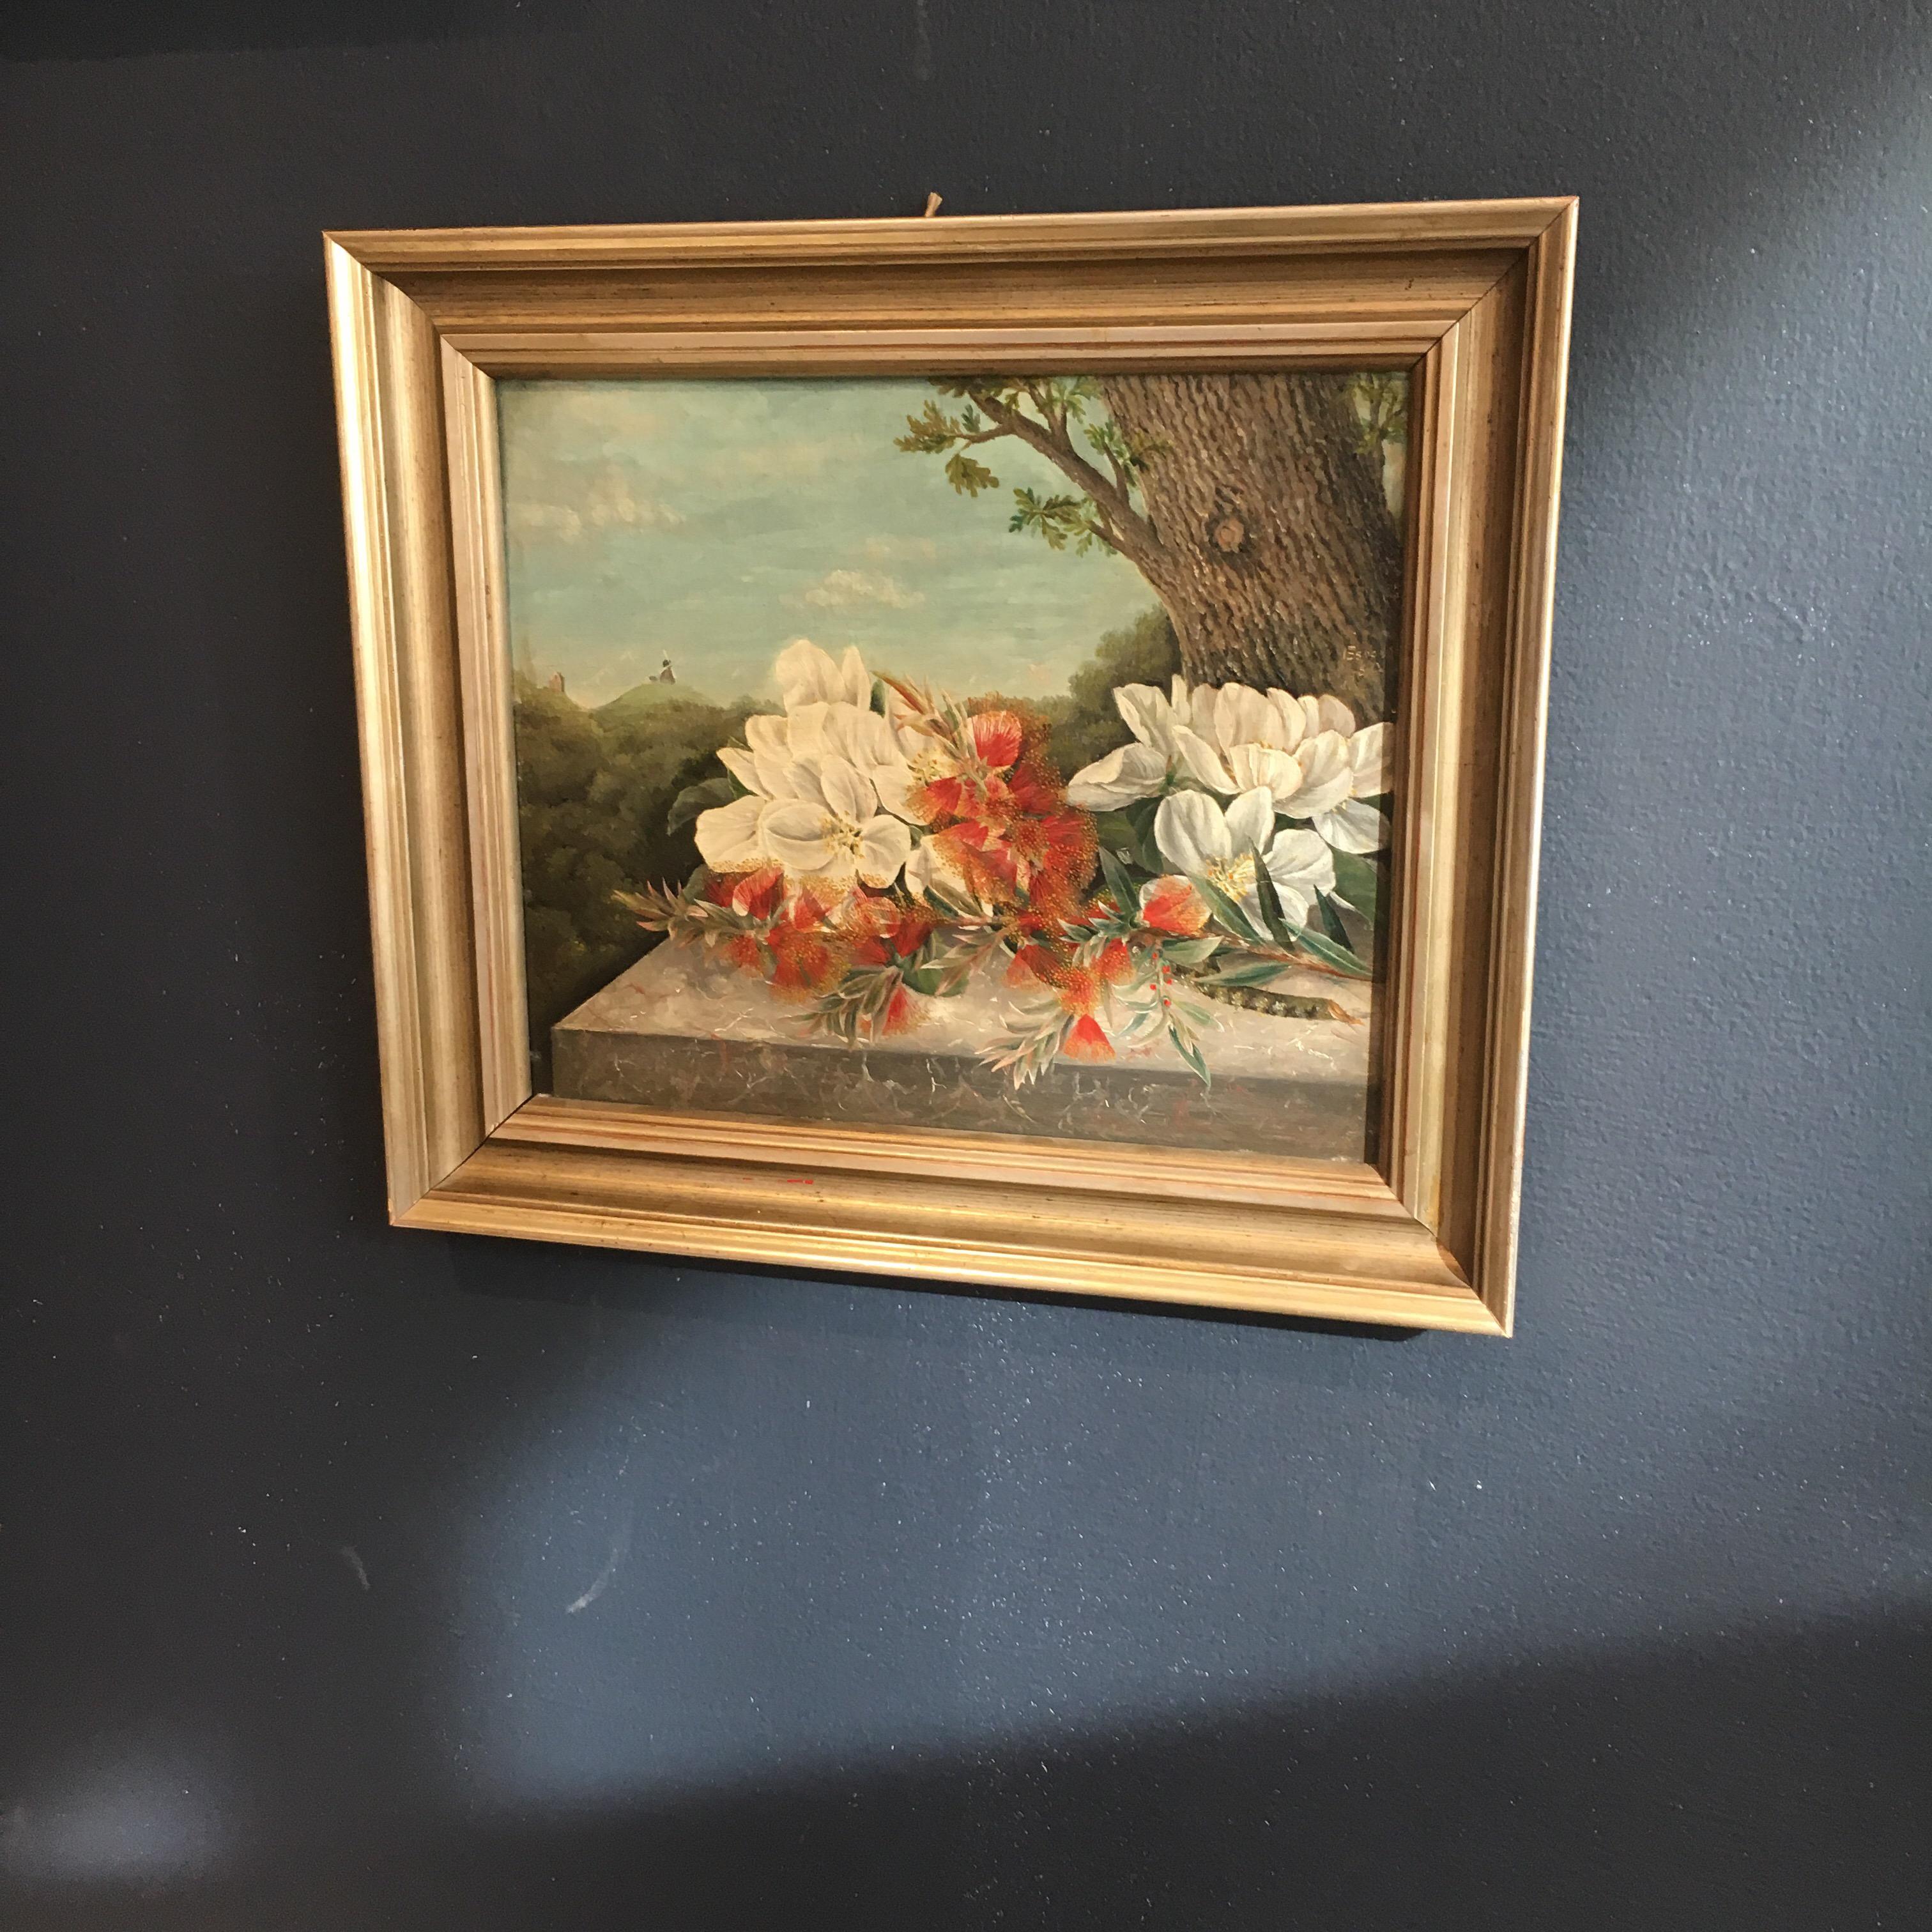 Beautiful small Danish still life of flowers resting on stone wall, with a trees and windmill and a small church visible in the distance. Oil on mahogany board. Signed and dated S.D. Espe 55.

Listed dimensions without frame.